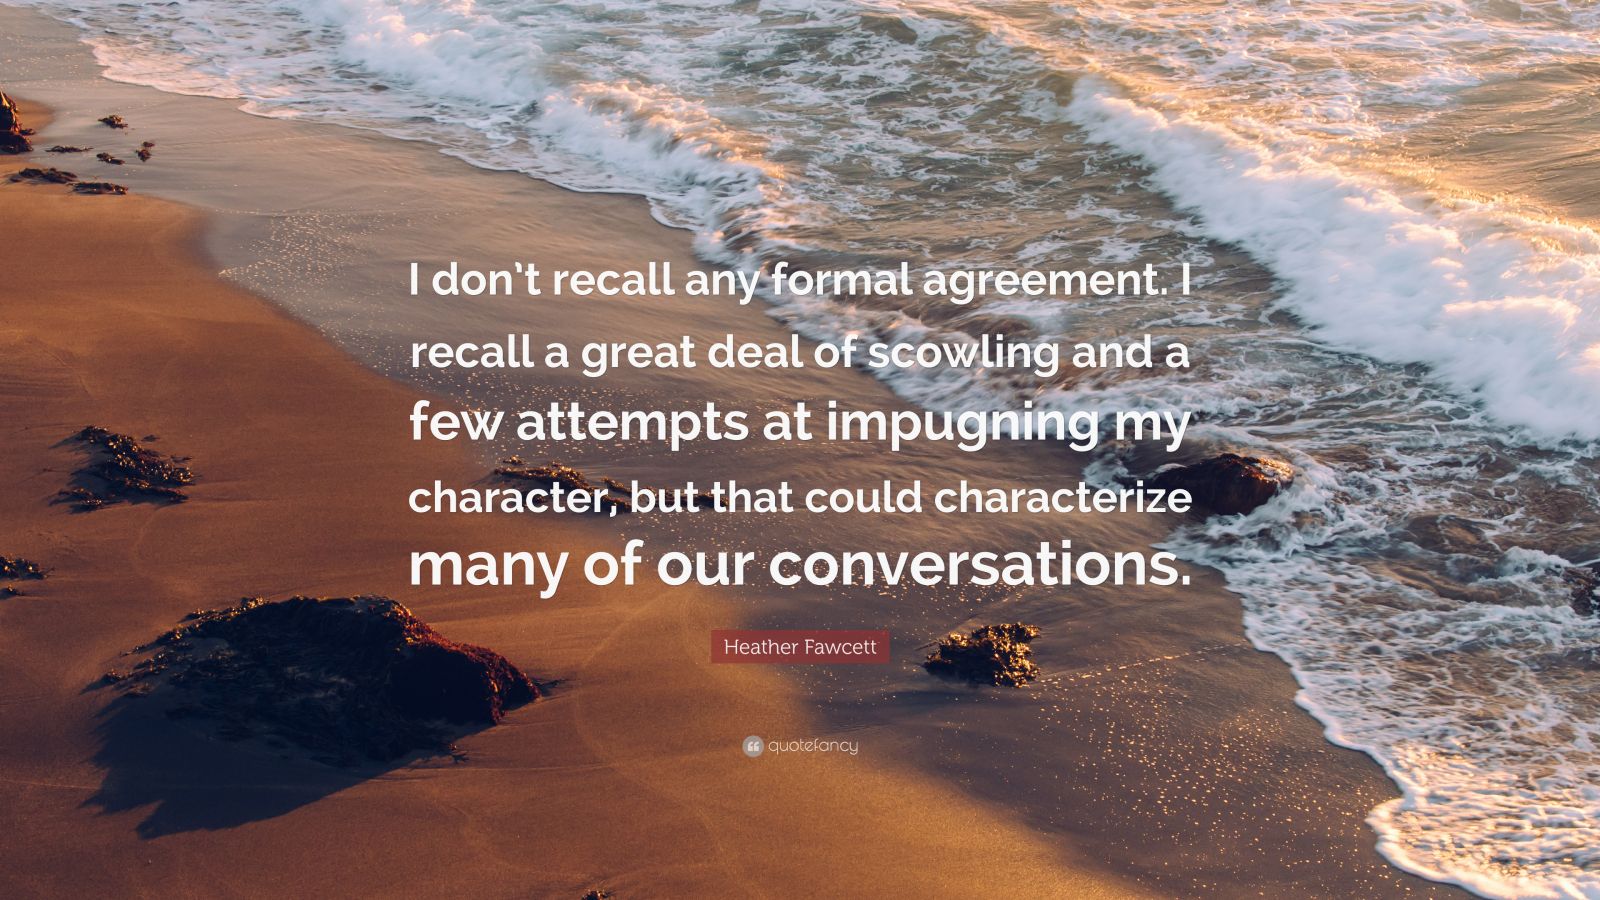 Heather Fawcett Quote: I don t recall any formal agreement I recall a